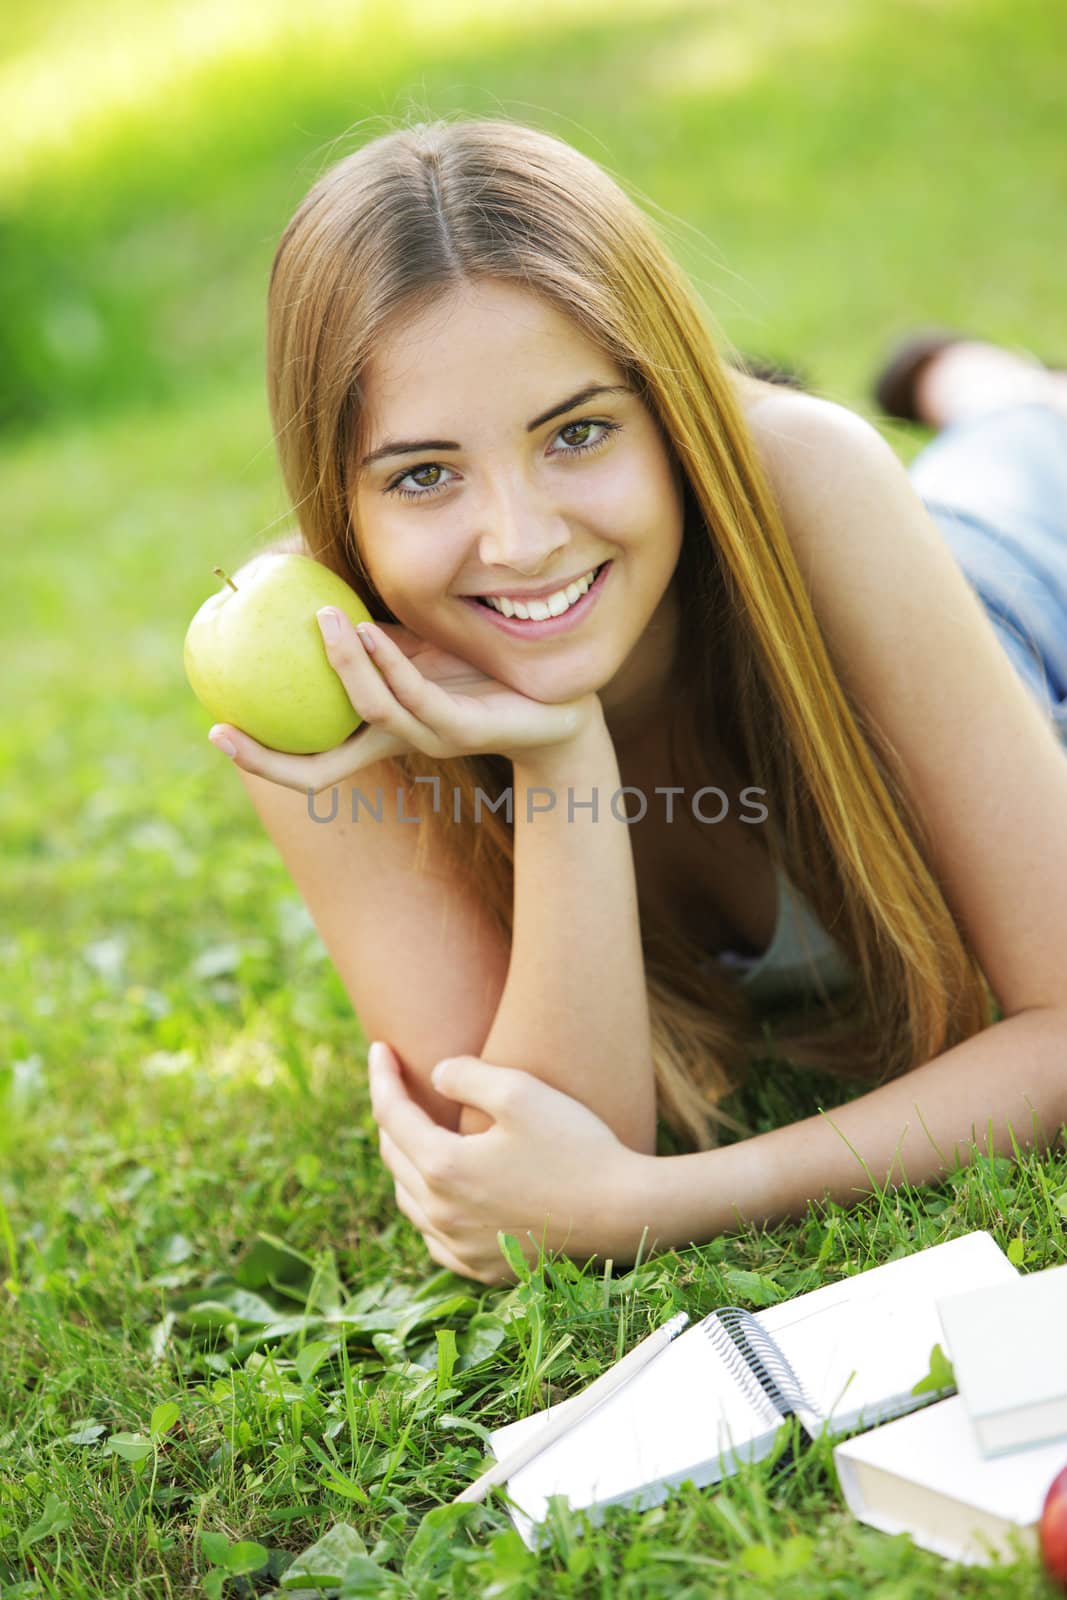 Young smiling woman outdoors holding an apple